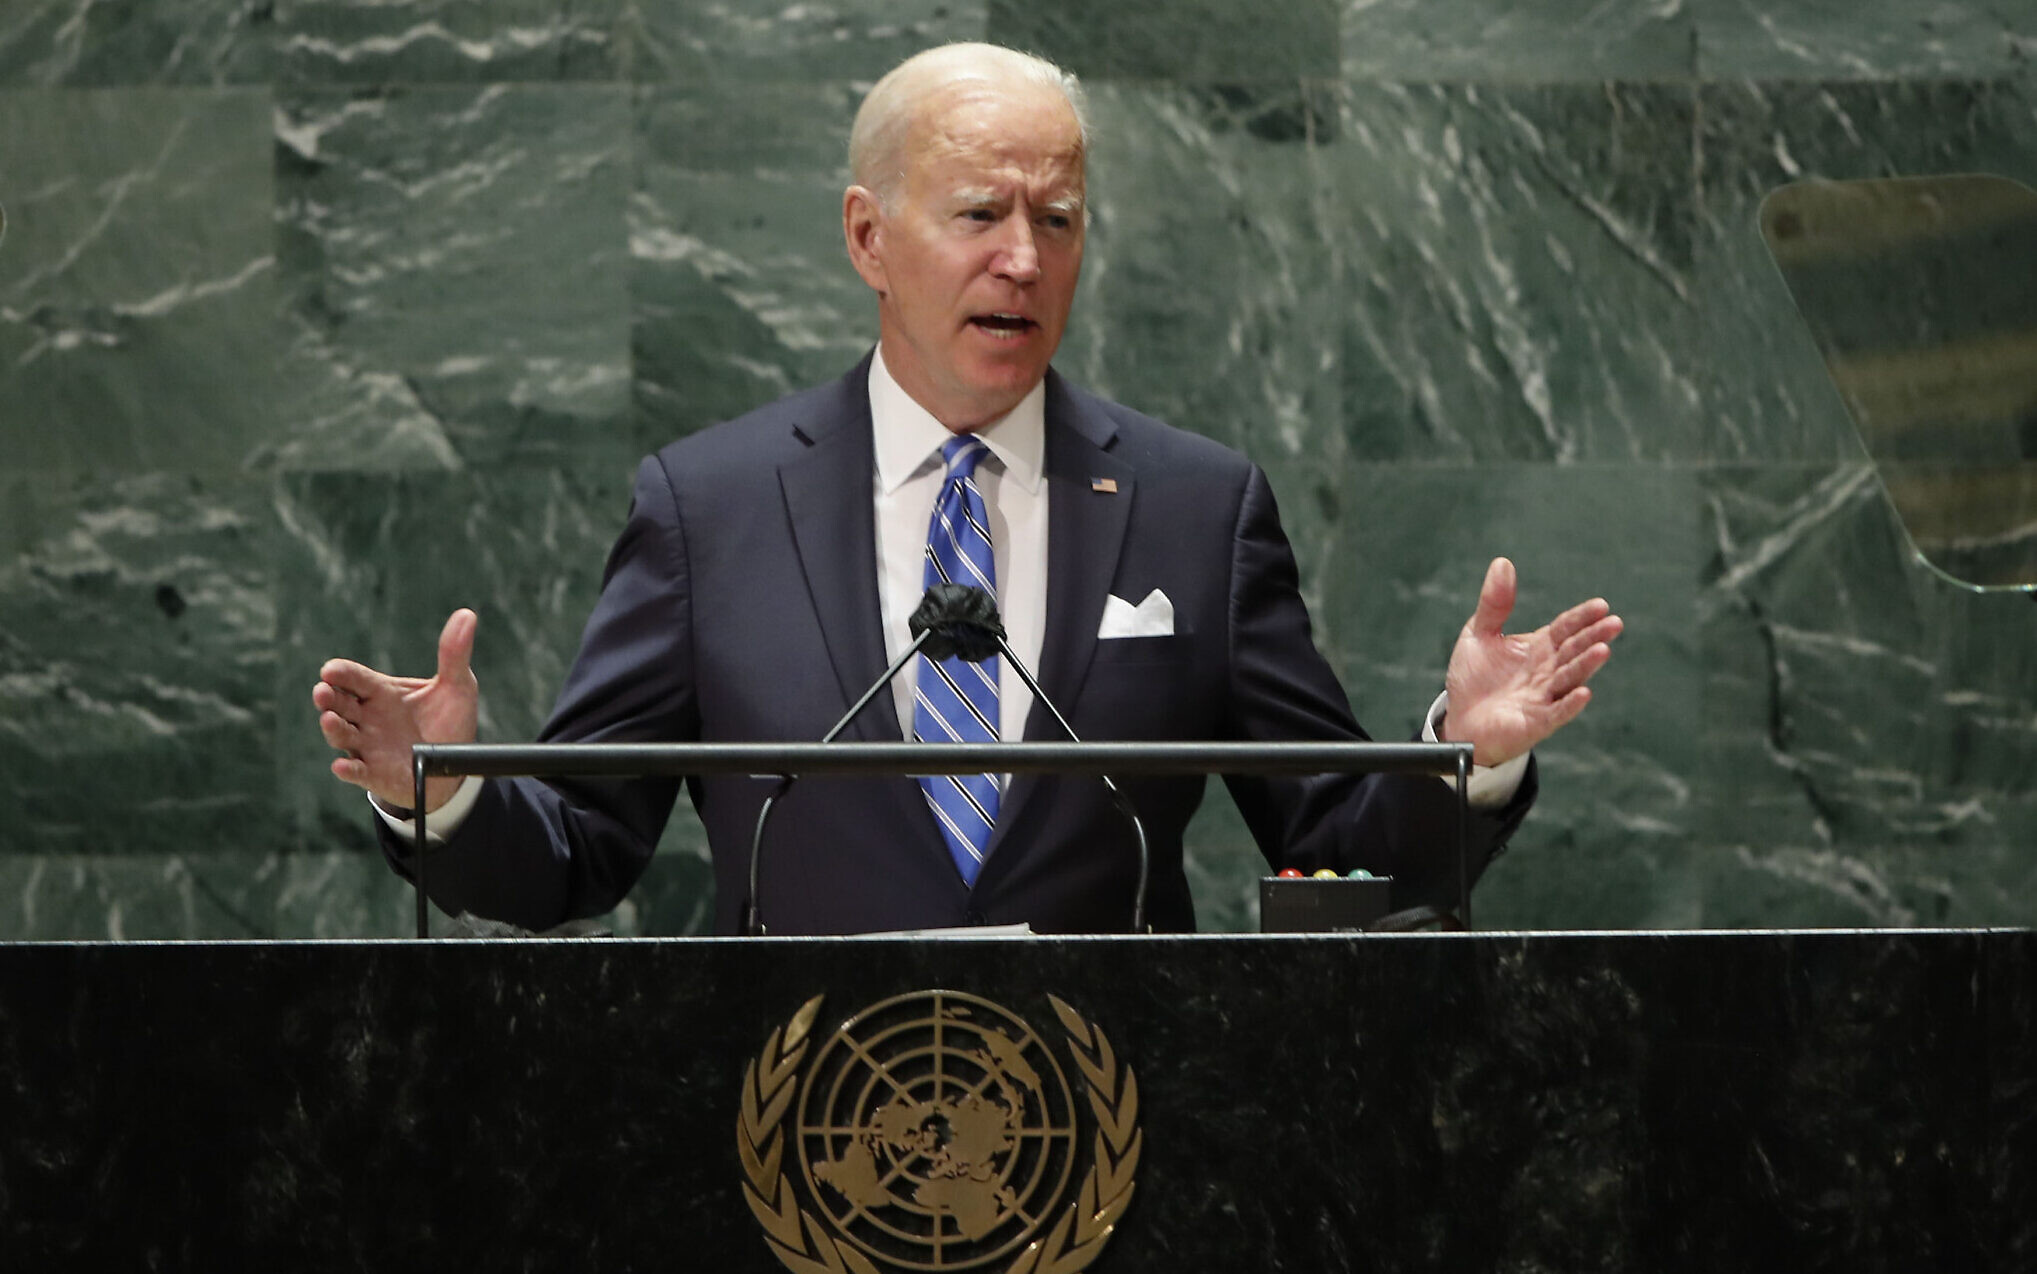 At UN, Biden says he's committed to preventing Iran from getting nuclear  arms | The Times of Israel